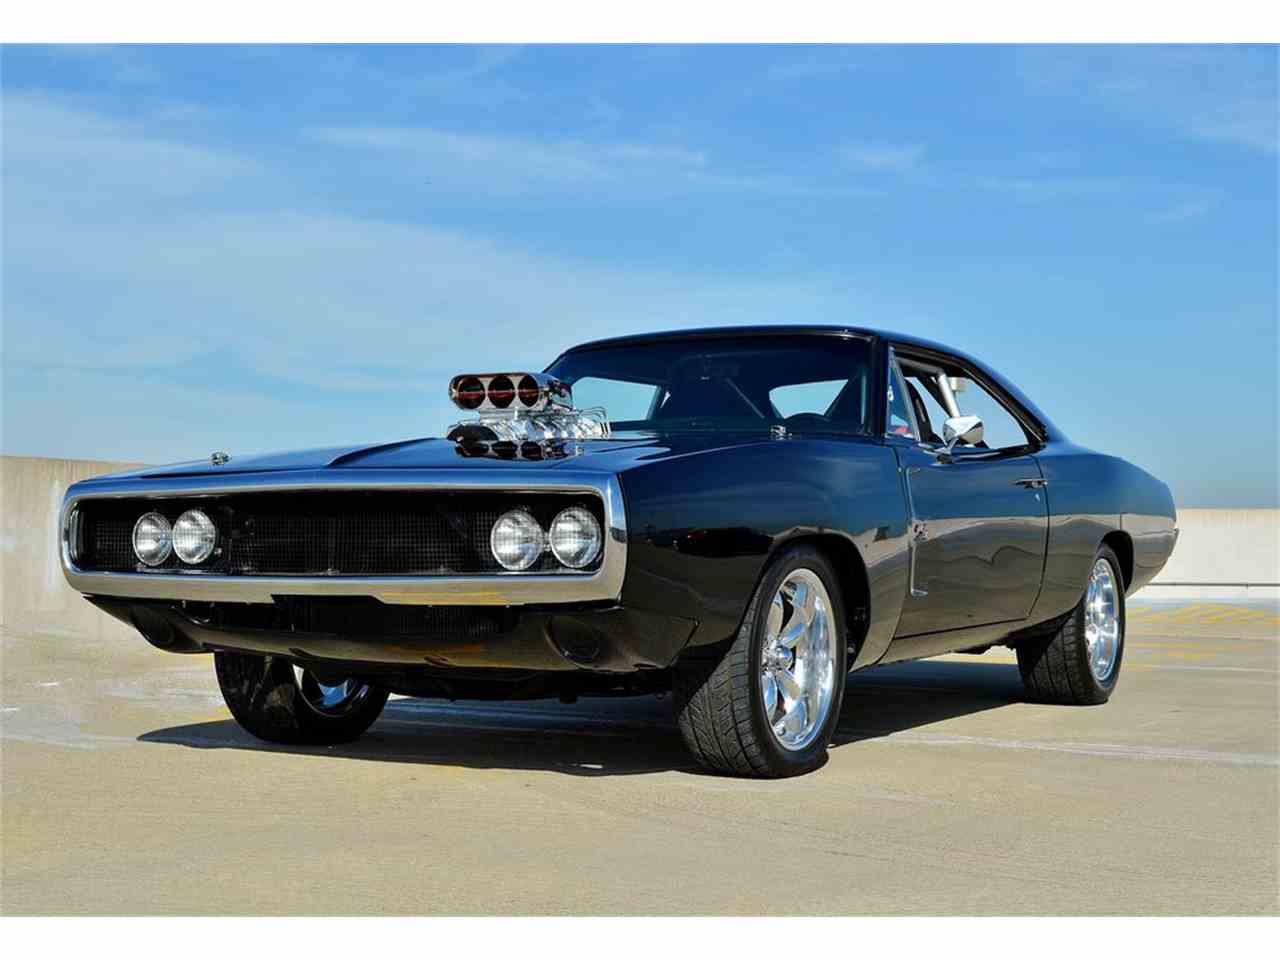 1968 Dodge Charger Fast N Furious Movie Car for Sale